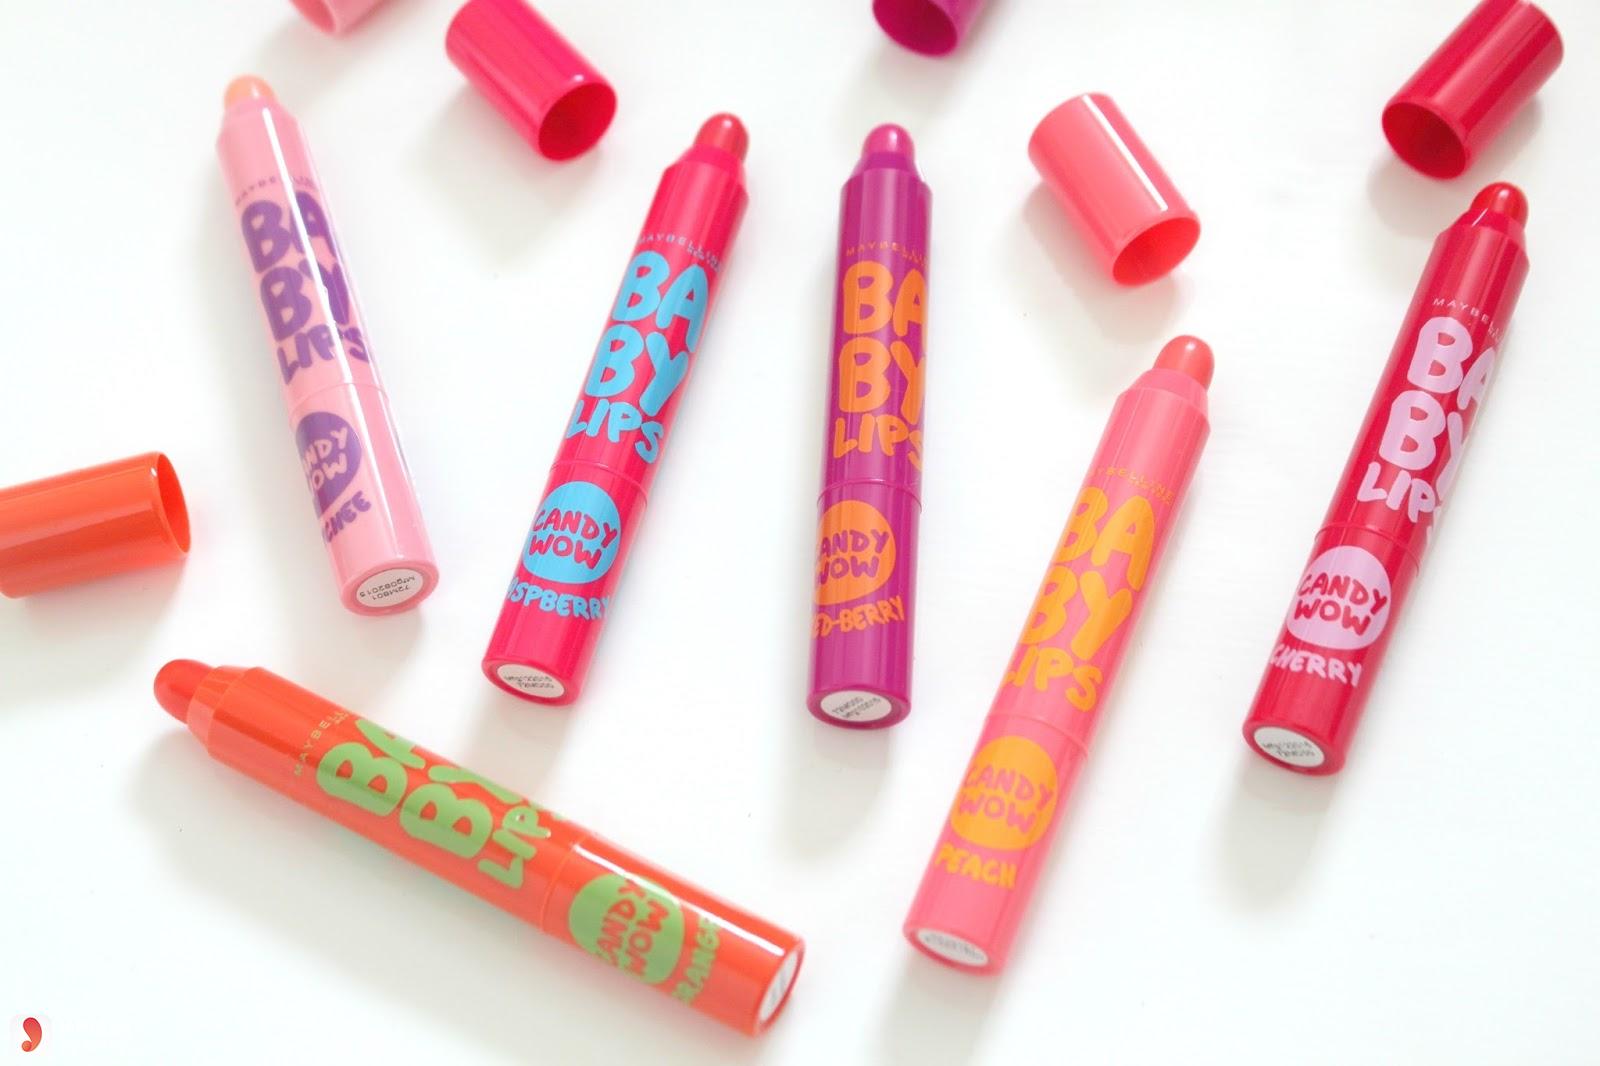 Son dưỡng môi Maybelline Baby Lips review